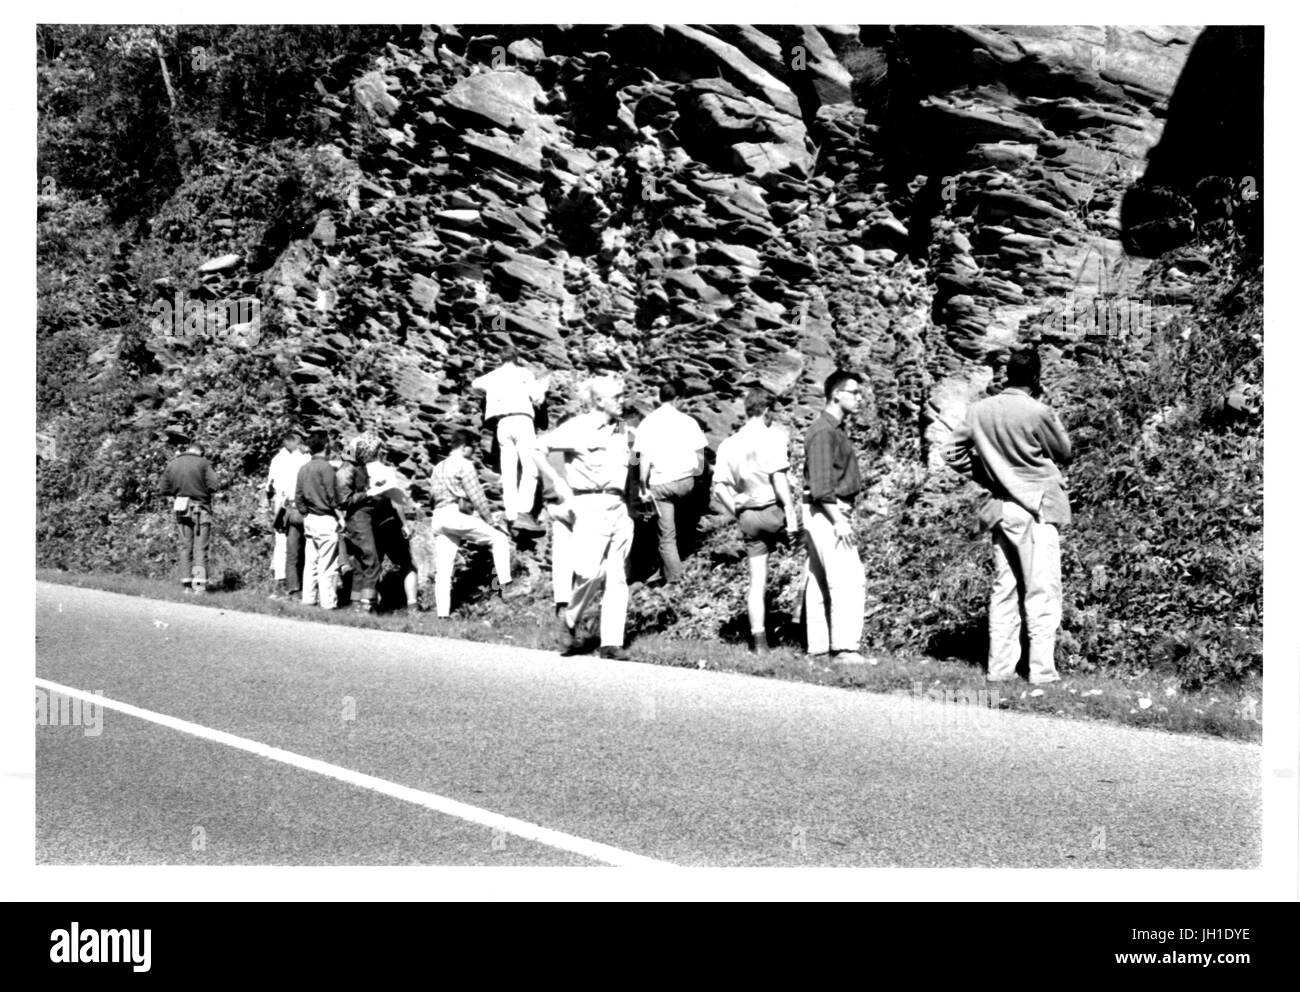 Distinguished geologist Ernst Cloos and students in his field class at Johns Hopkins University examine rock formations beside a road, 1955. Stock Photo